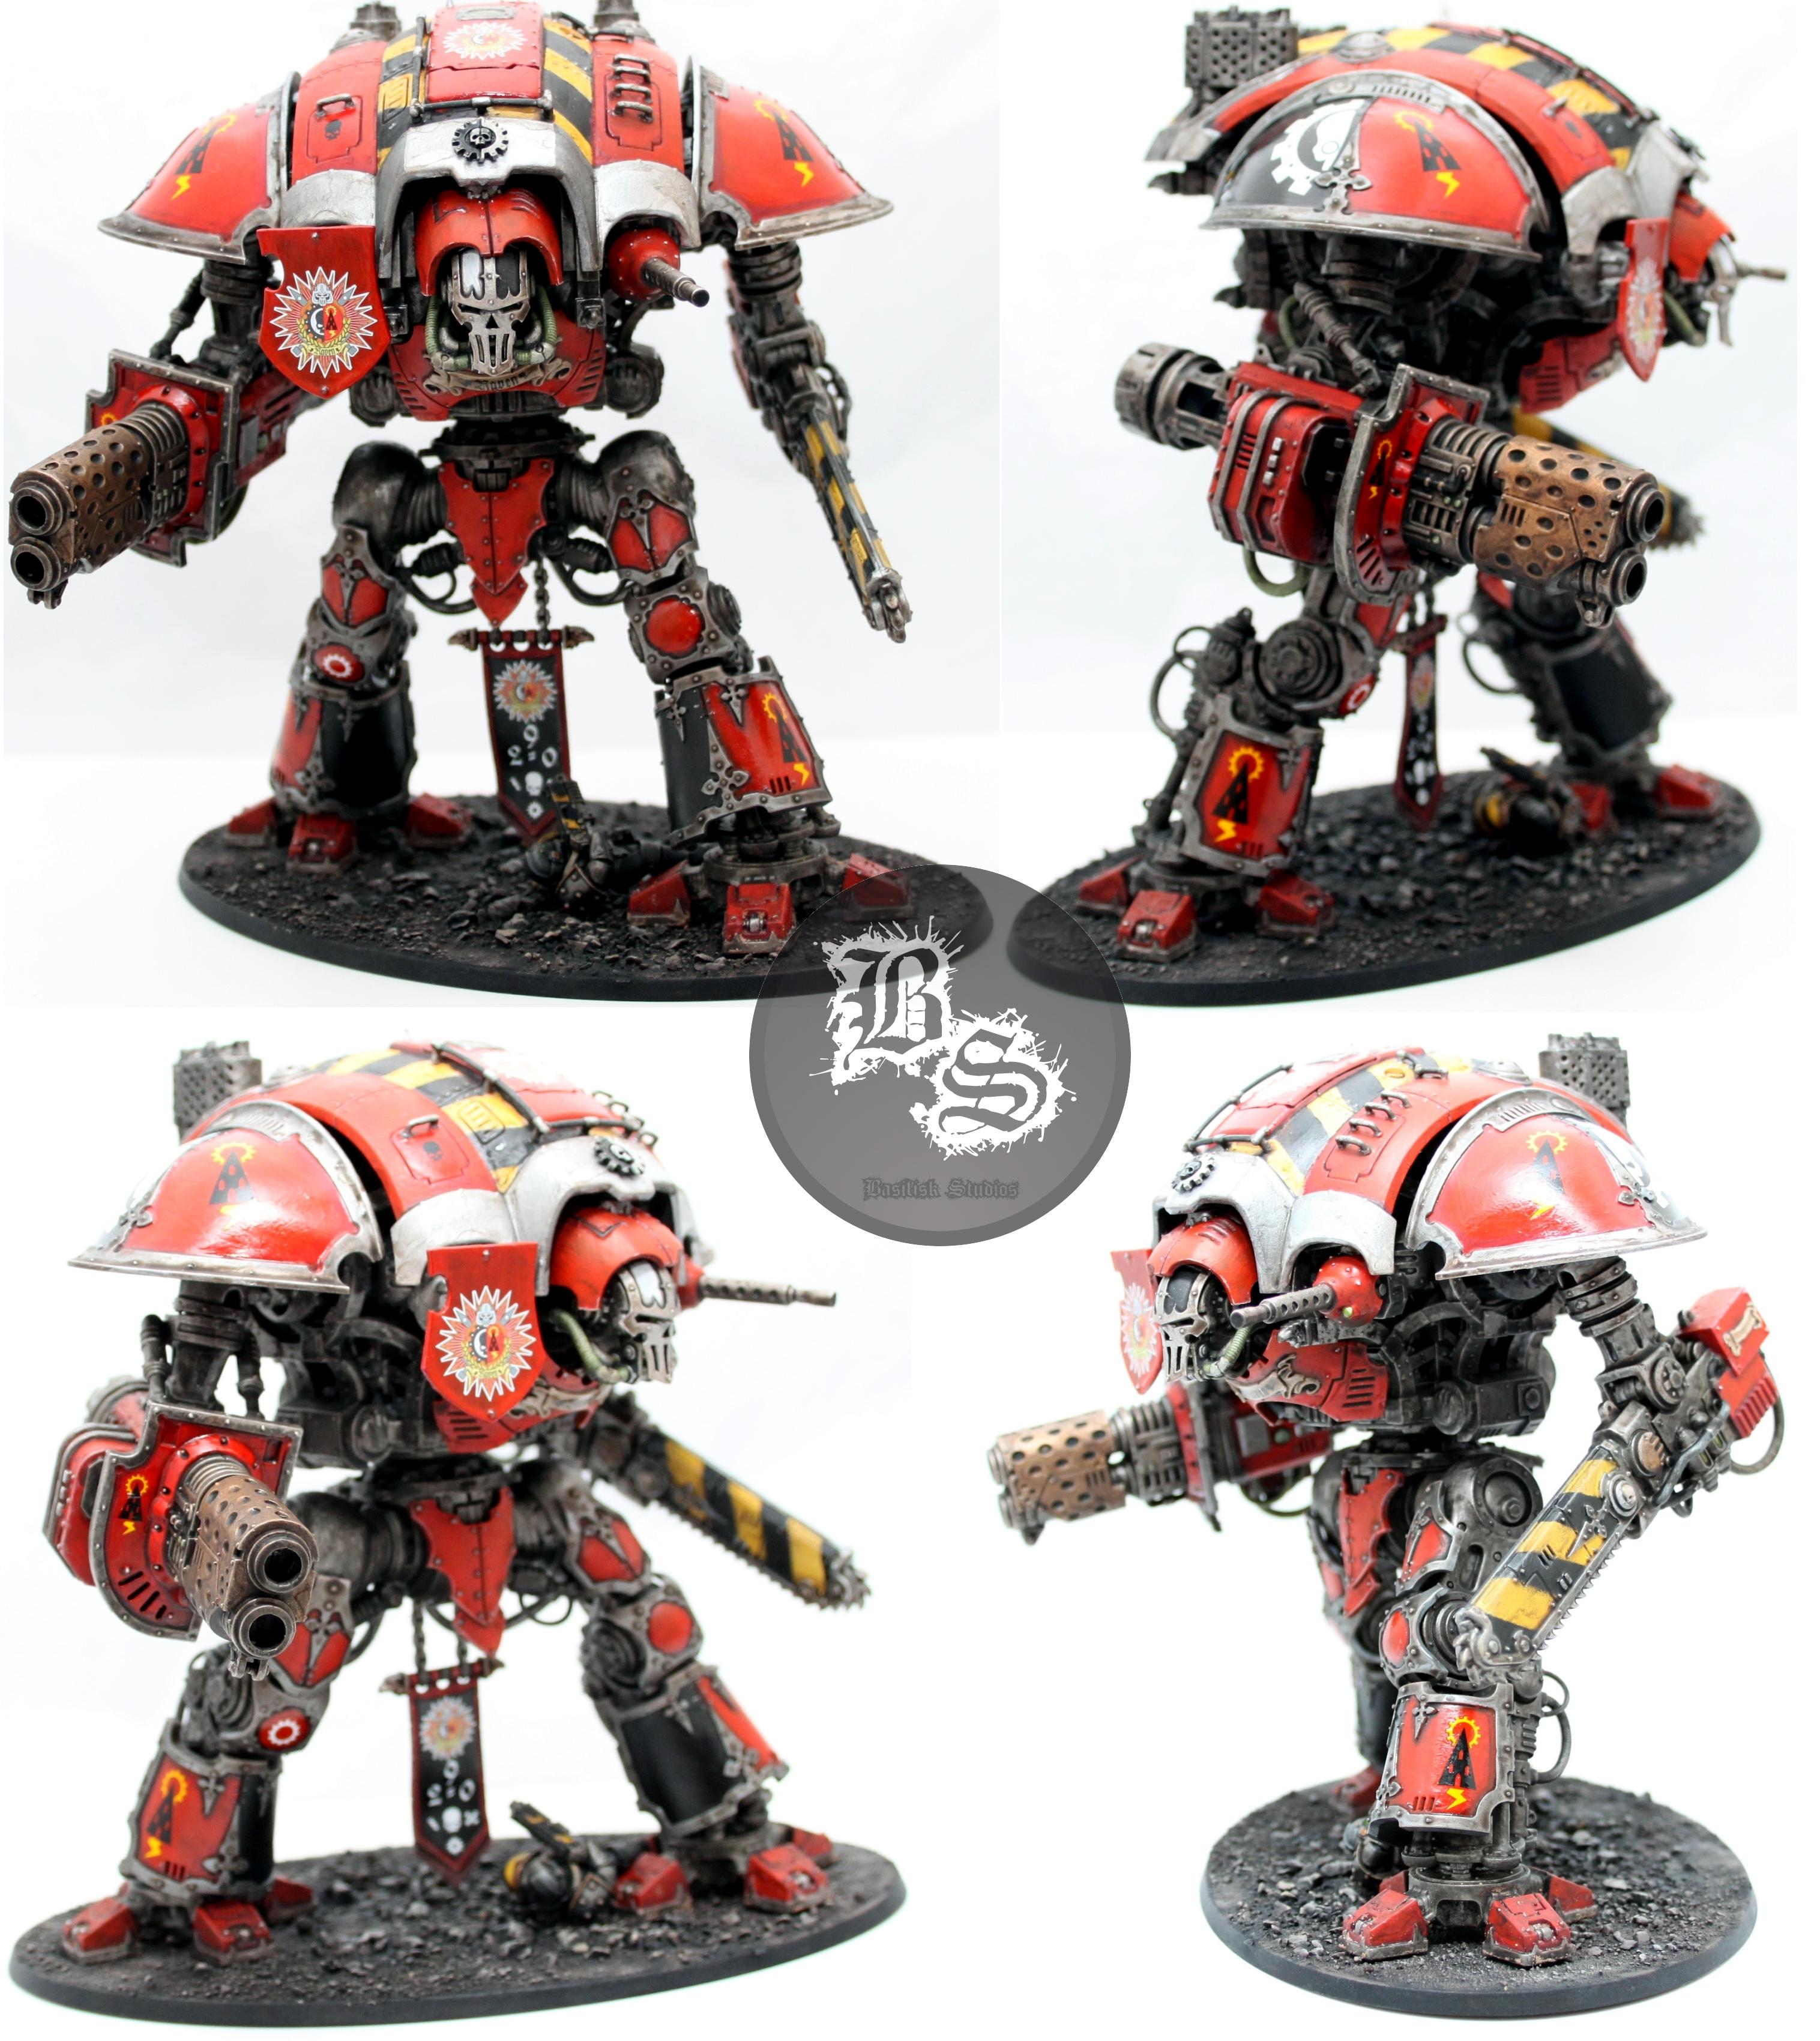 Imperial, Knights, House Raven - Imperial Knight